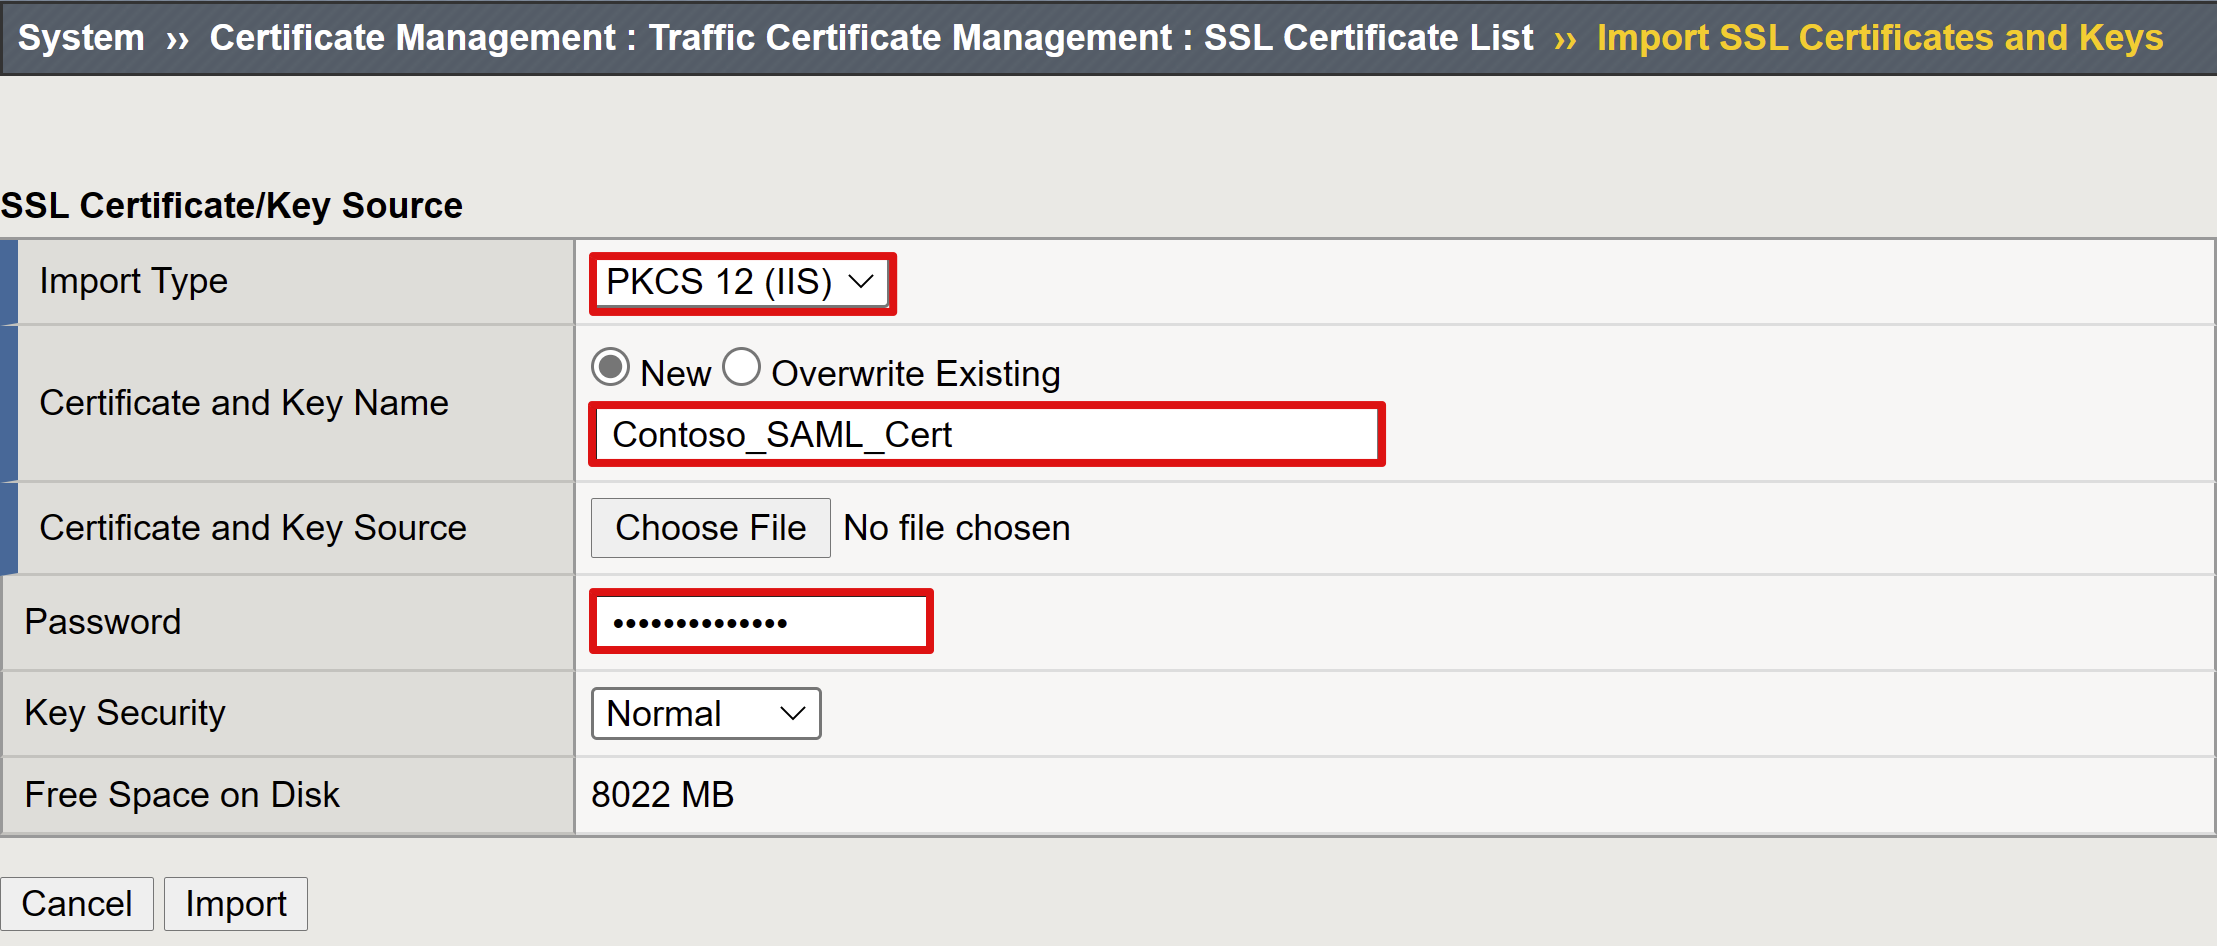 Screenshot of options and selections for SSL Certificate and Key Source.